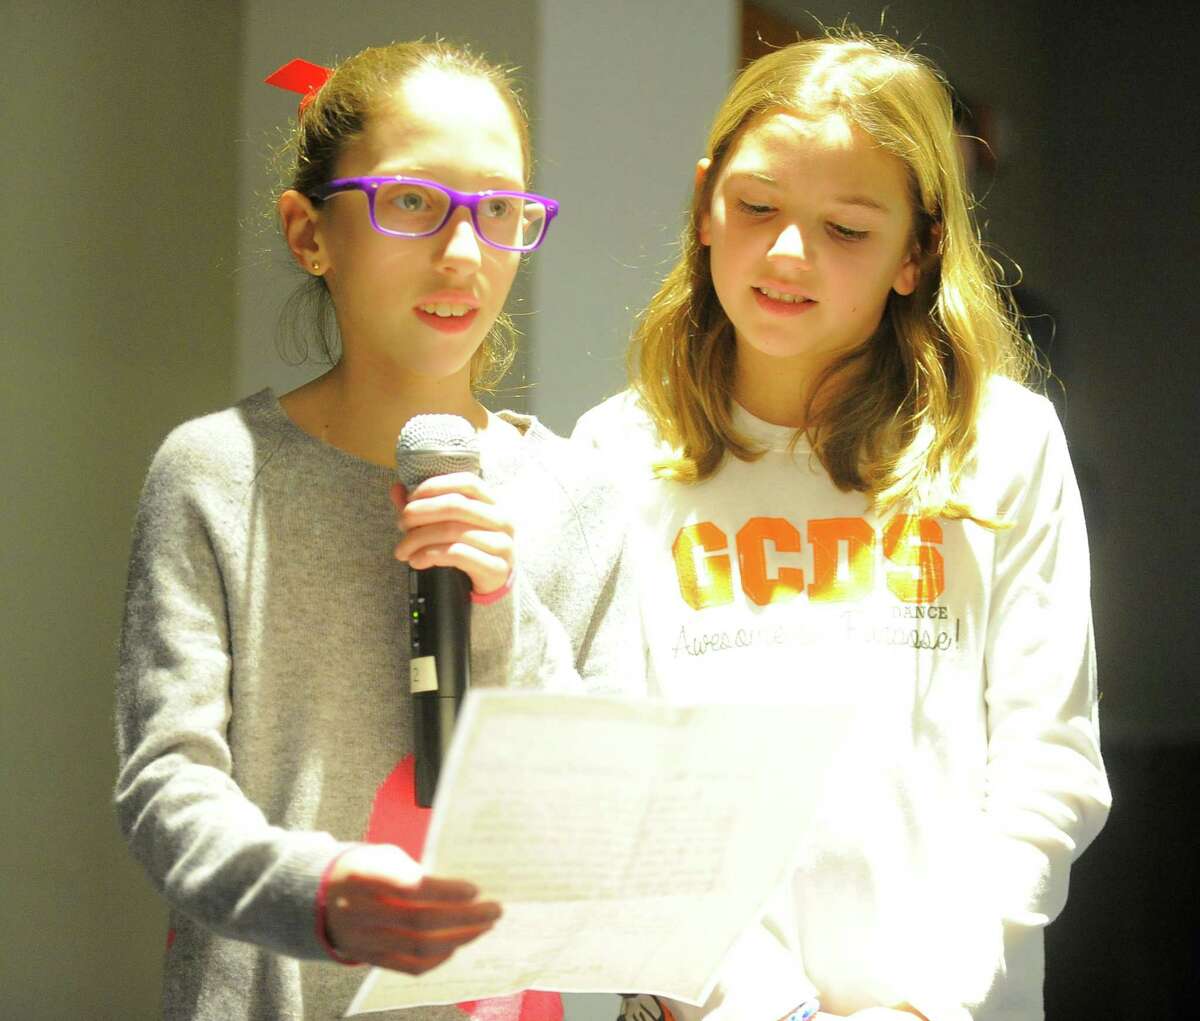 Annabelle Elkin, 10, of Old Greenwich, stands and listen as 11-year-old Sami Goldman, of Old Greenwich, reads a letter she wrote to Connecticut Gov. Dannel P. Malloy during a town hall forum in Stamford on Thursday.